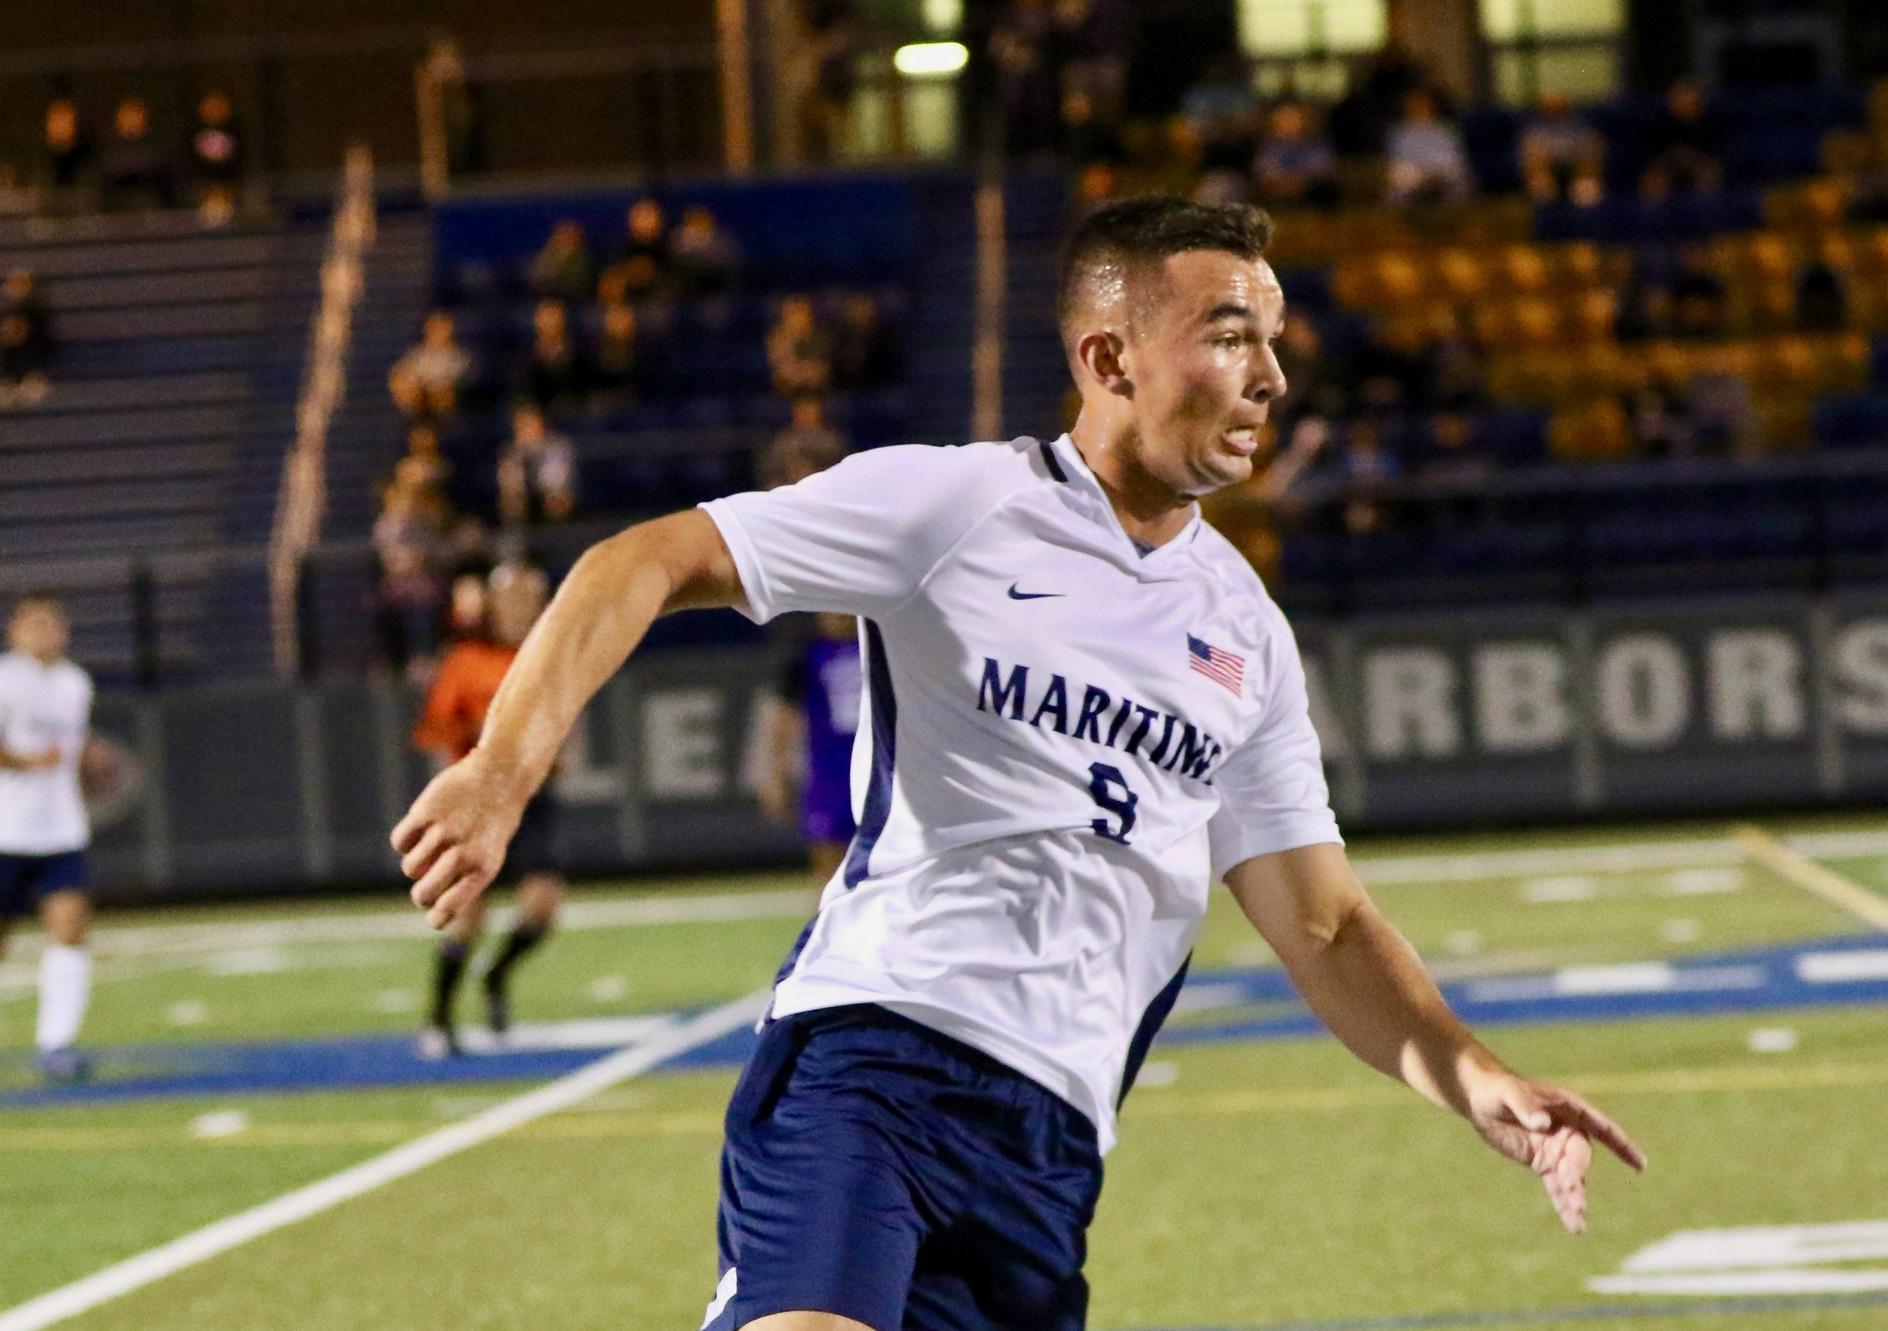 Men's Soccer: Bucs Lose Non-Conference Matchup with Bison